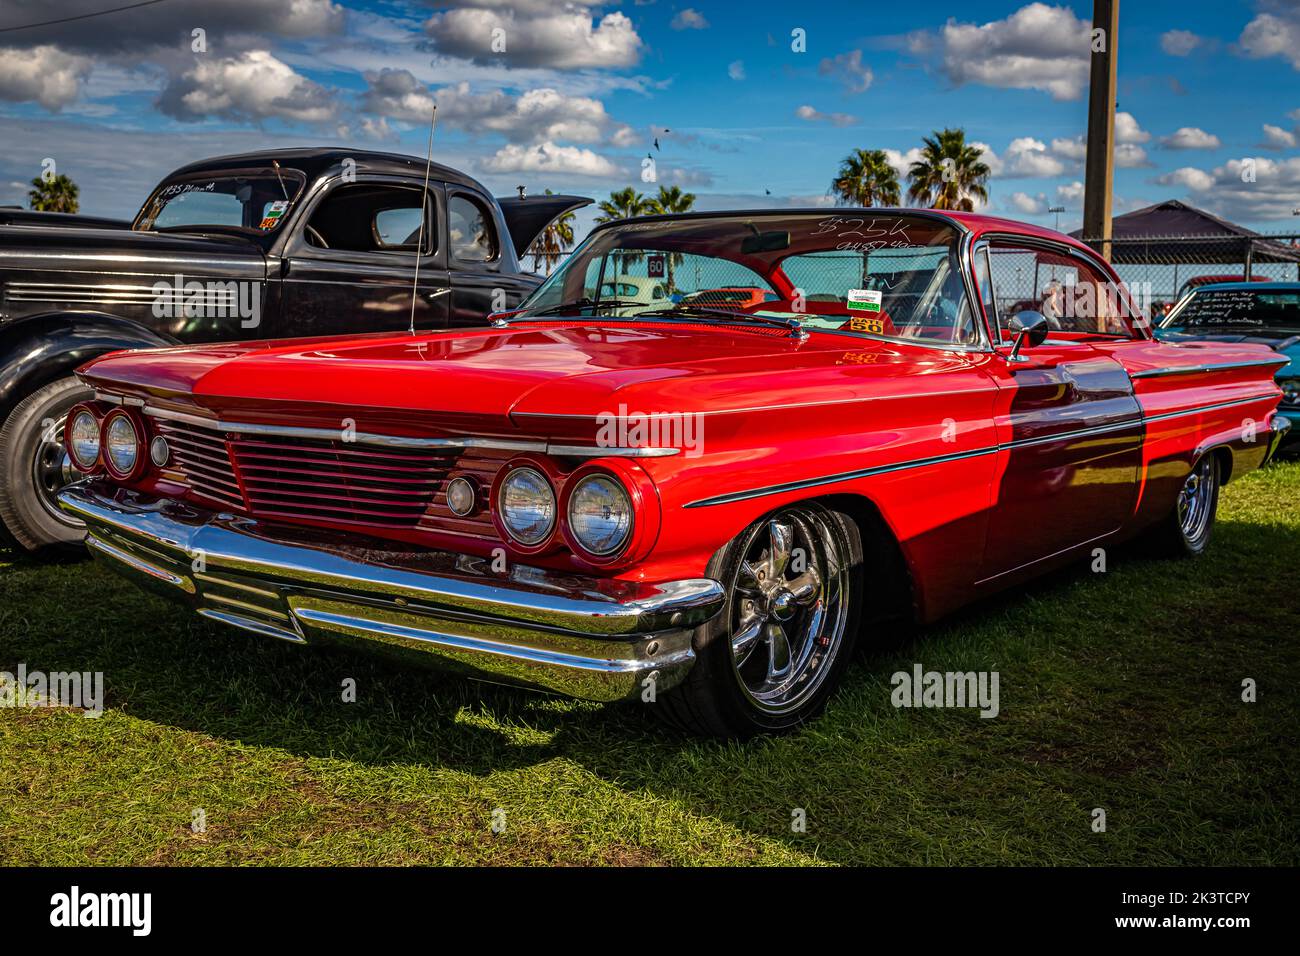 Daytona Beach, FL - November 28, 2020: Low perspective front corner view of a 1960 Pontiac Catalina Sport Coupe Hardtop at a local car show. Stock Photo